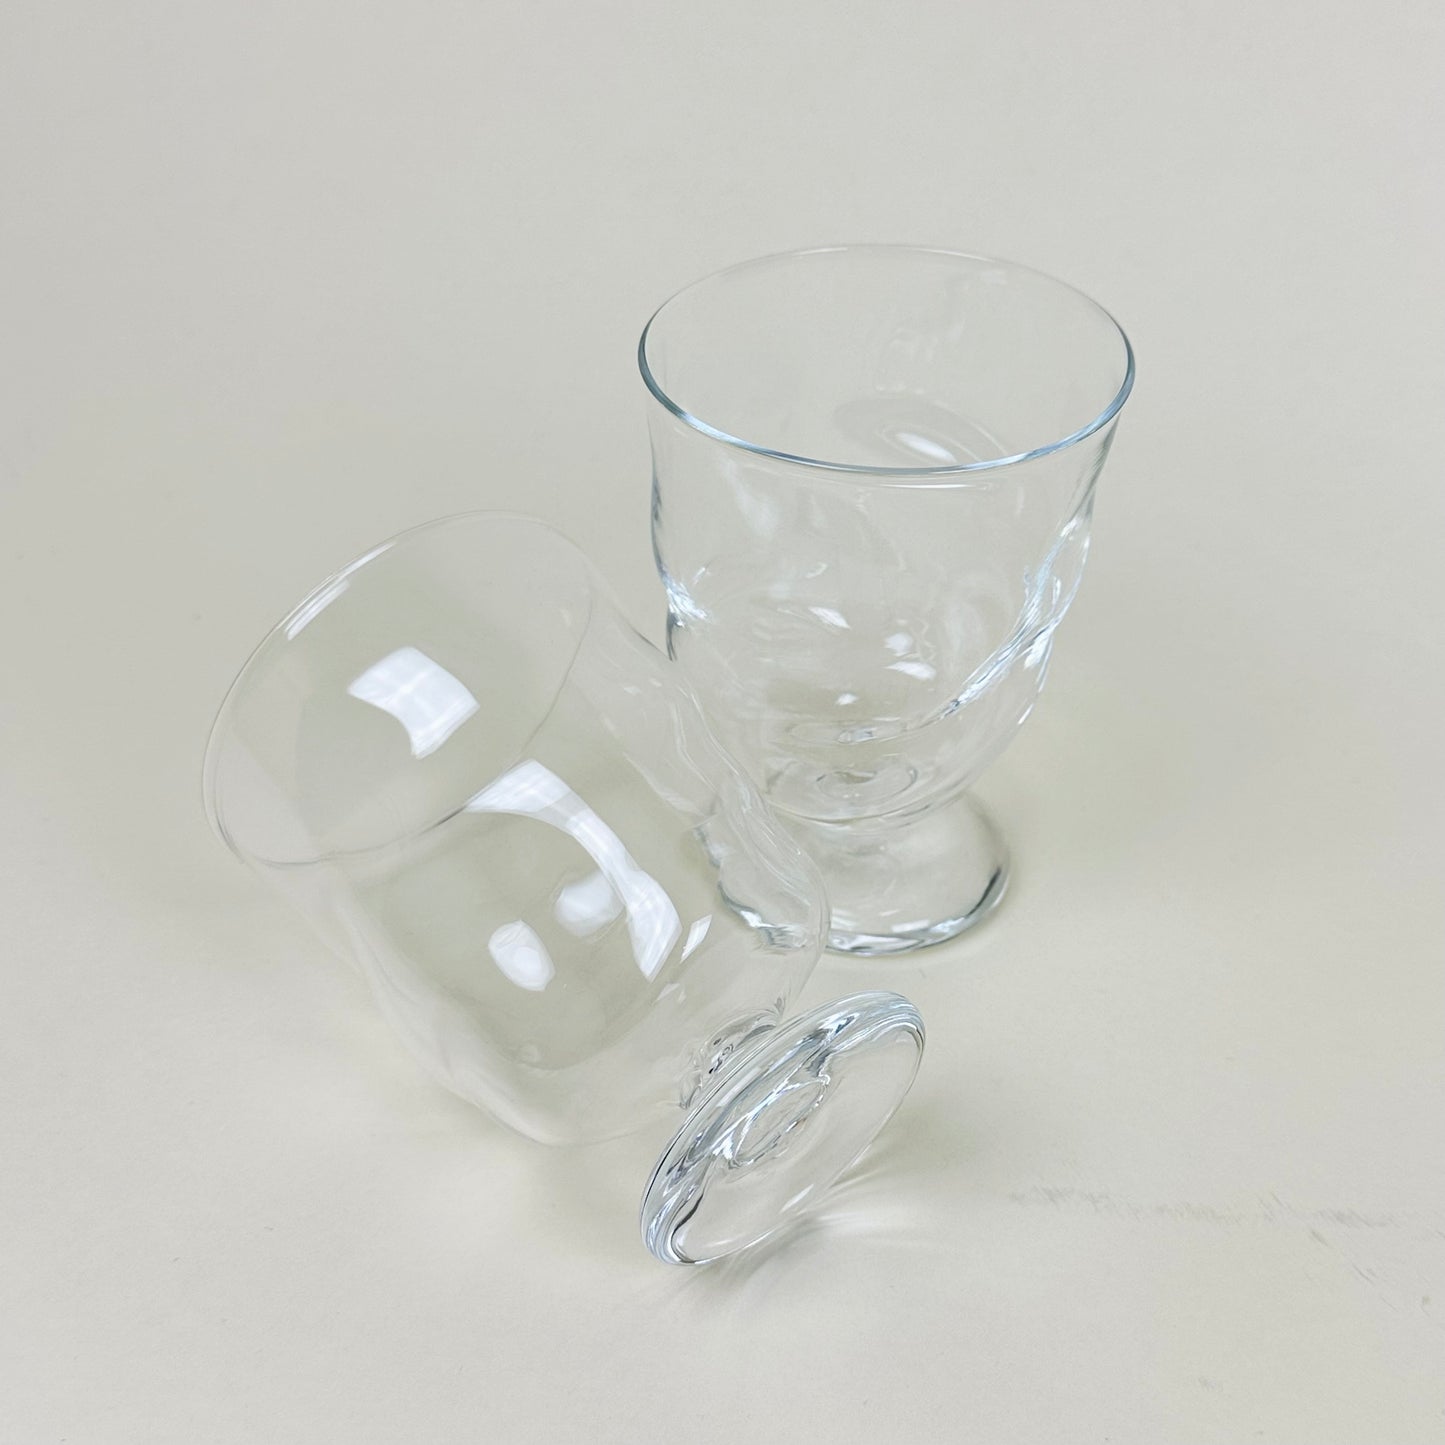 Glass with foot by Silje Lindrup